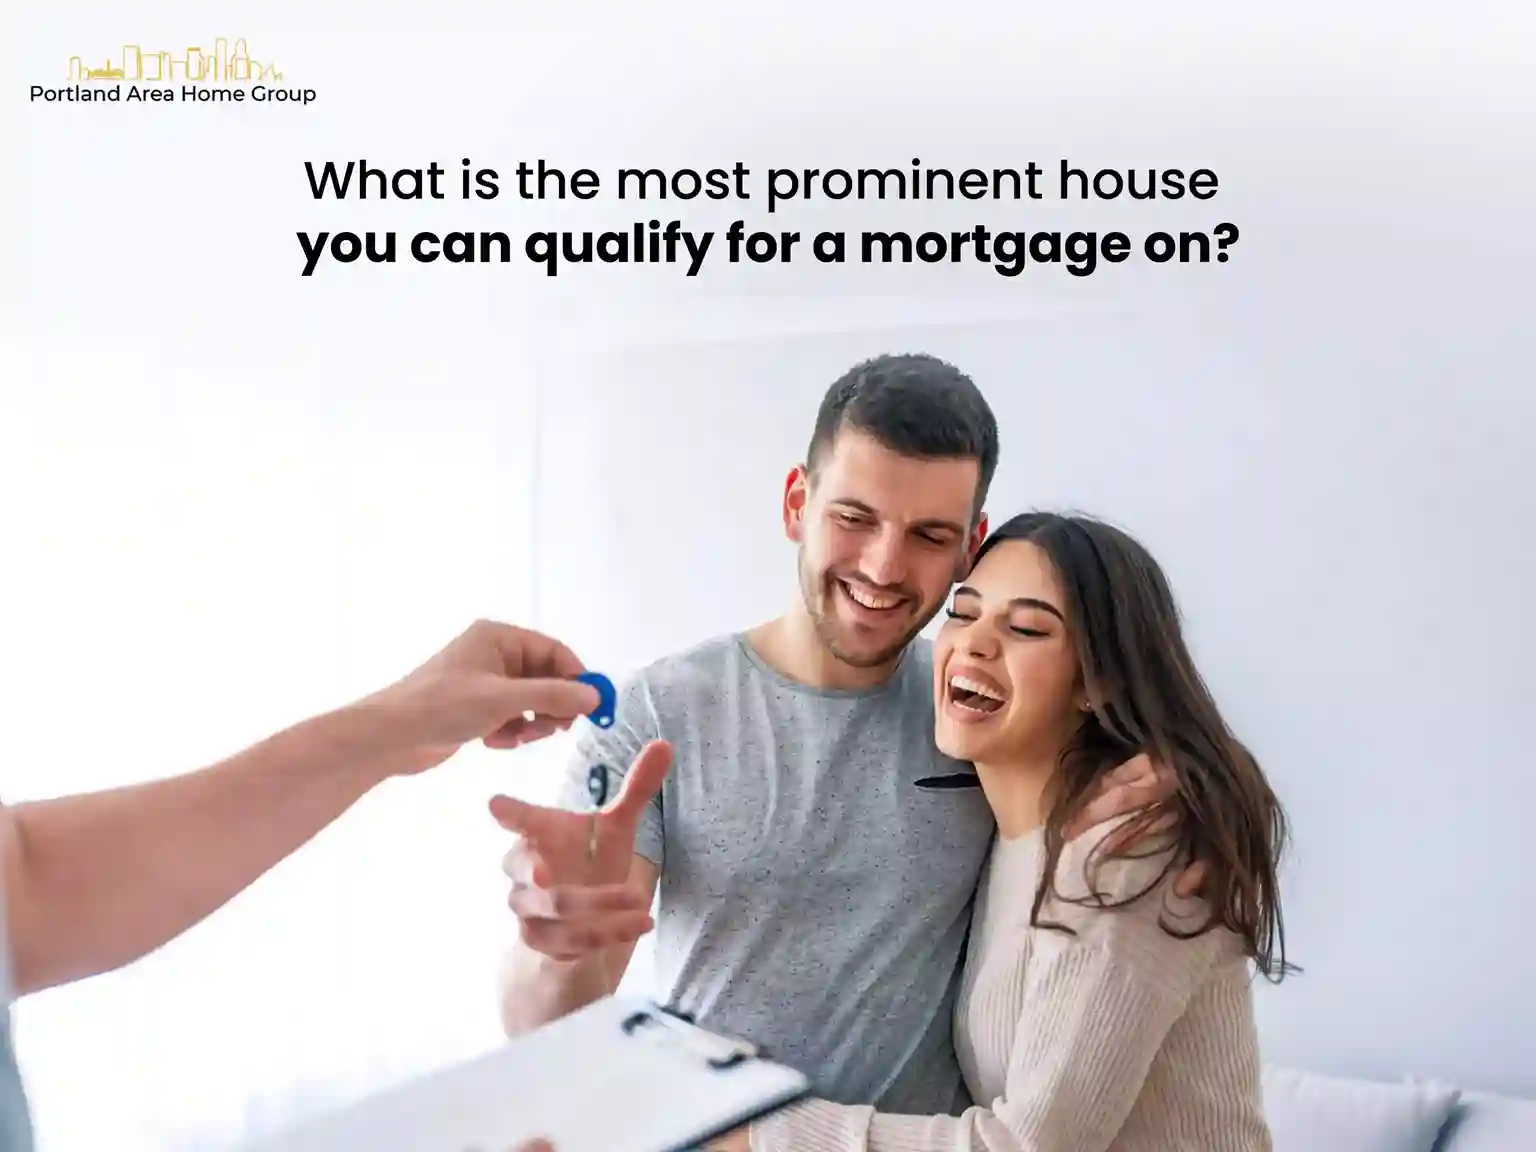 What is the most prominent house you can qualify for a mortgage on